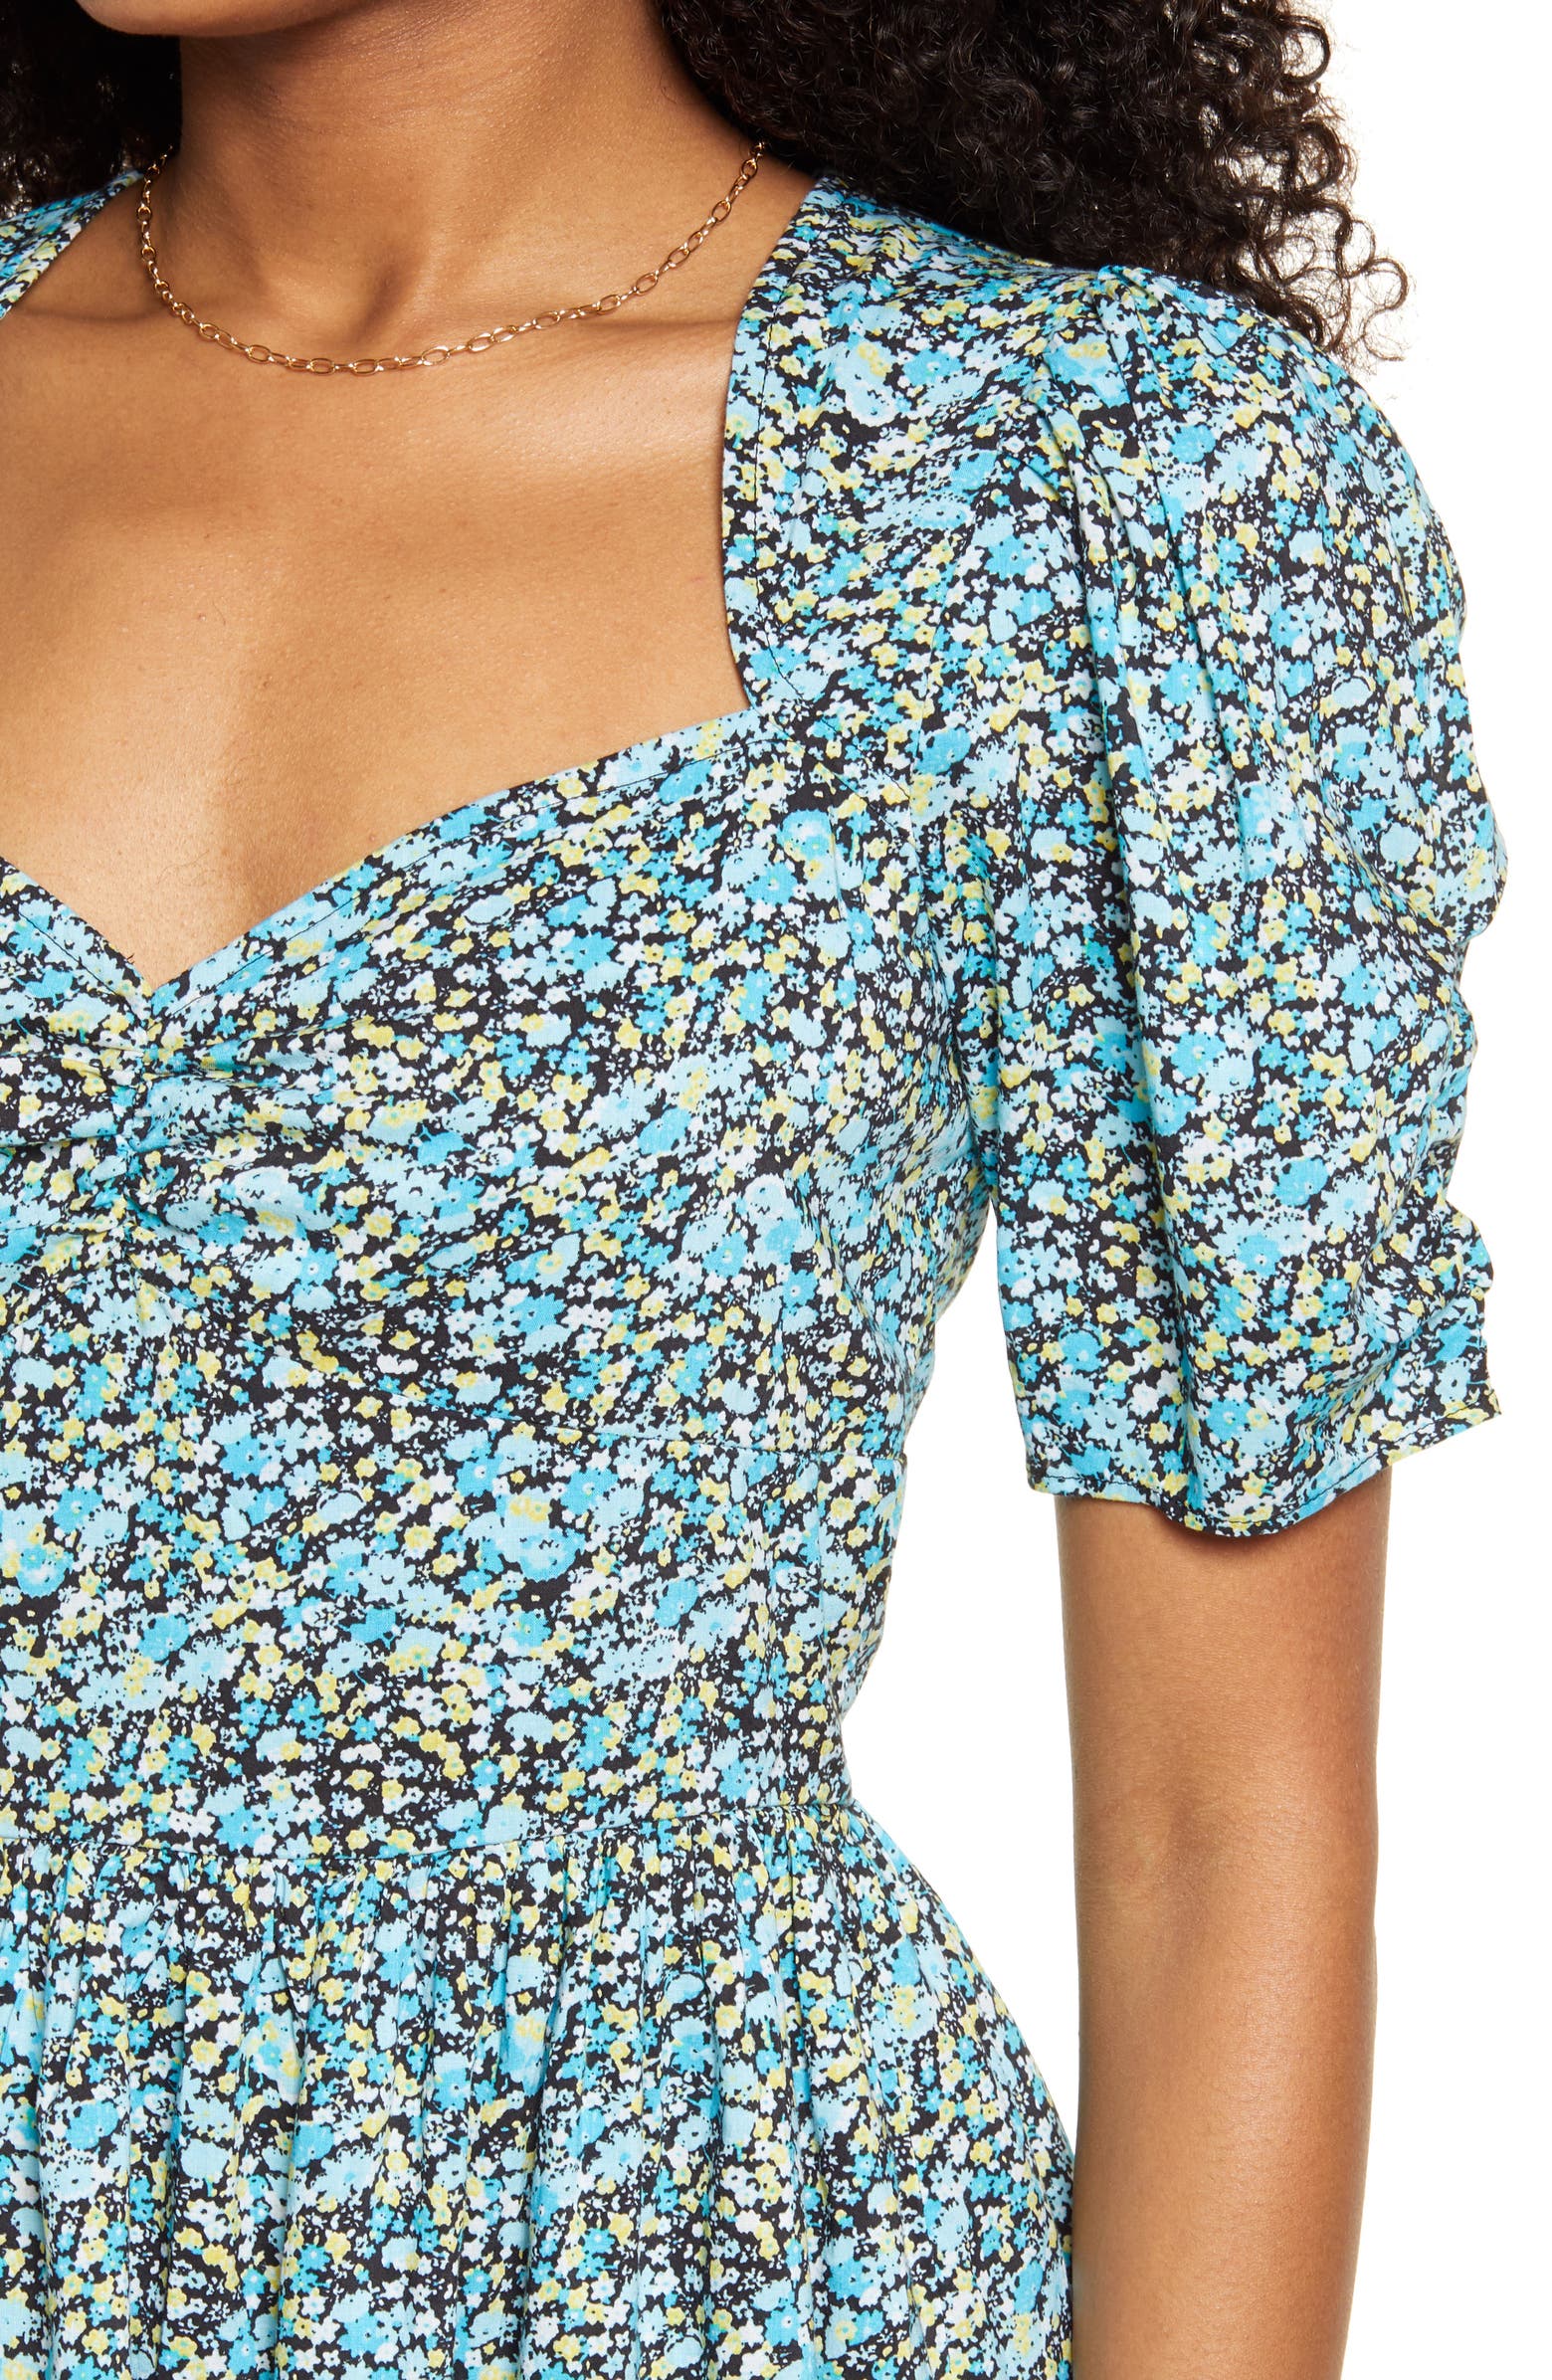 Floral Print Fit & Flare Minidress on Sale At